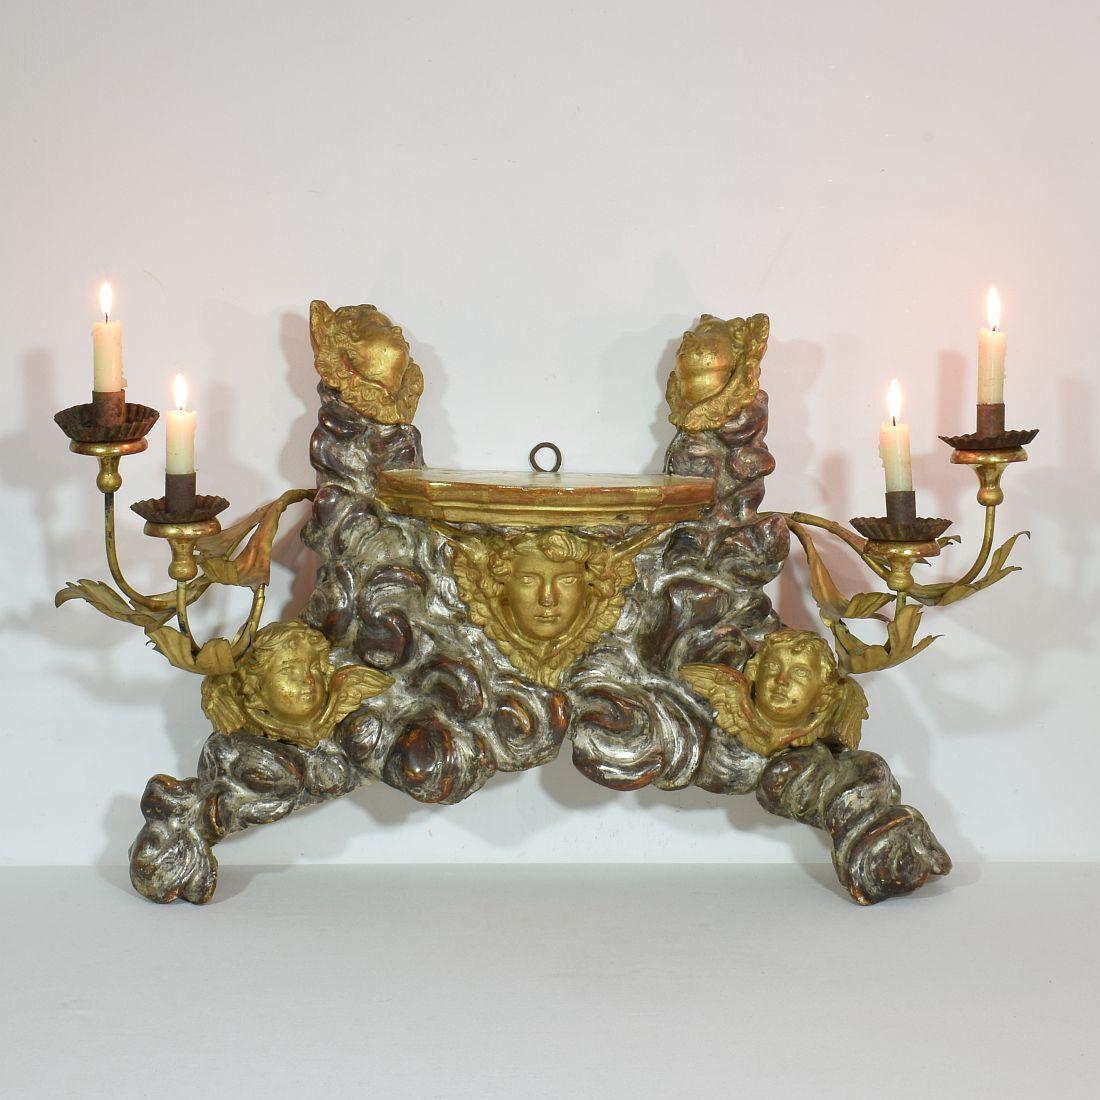 Spectacular Baroque style wall altar with candle holders and angels., Italy, circa 1850.
Despite of its age in a good but weathered condition.